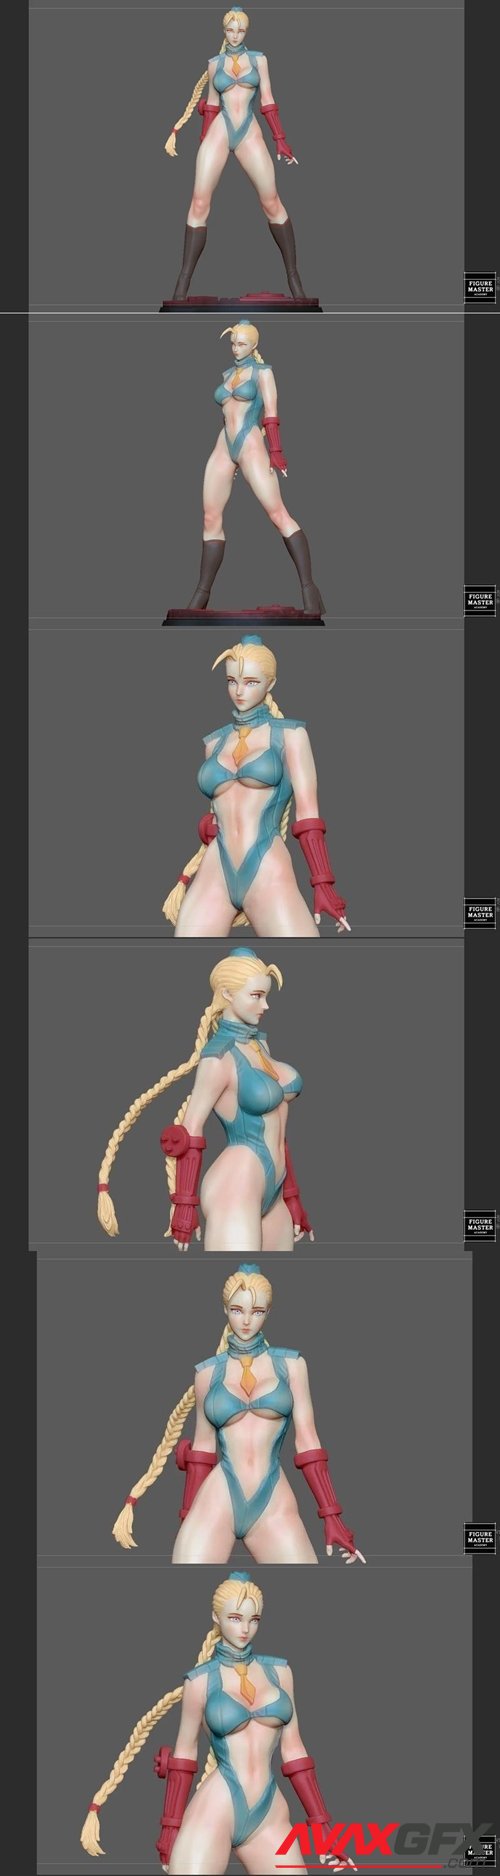 CAMMY STREET FIGHTER GAME CHARACTER GIRL ANIME WOMAN – 3D Printable STL